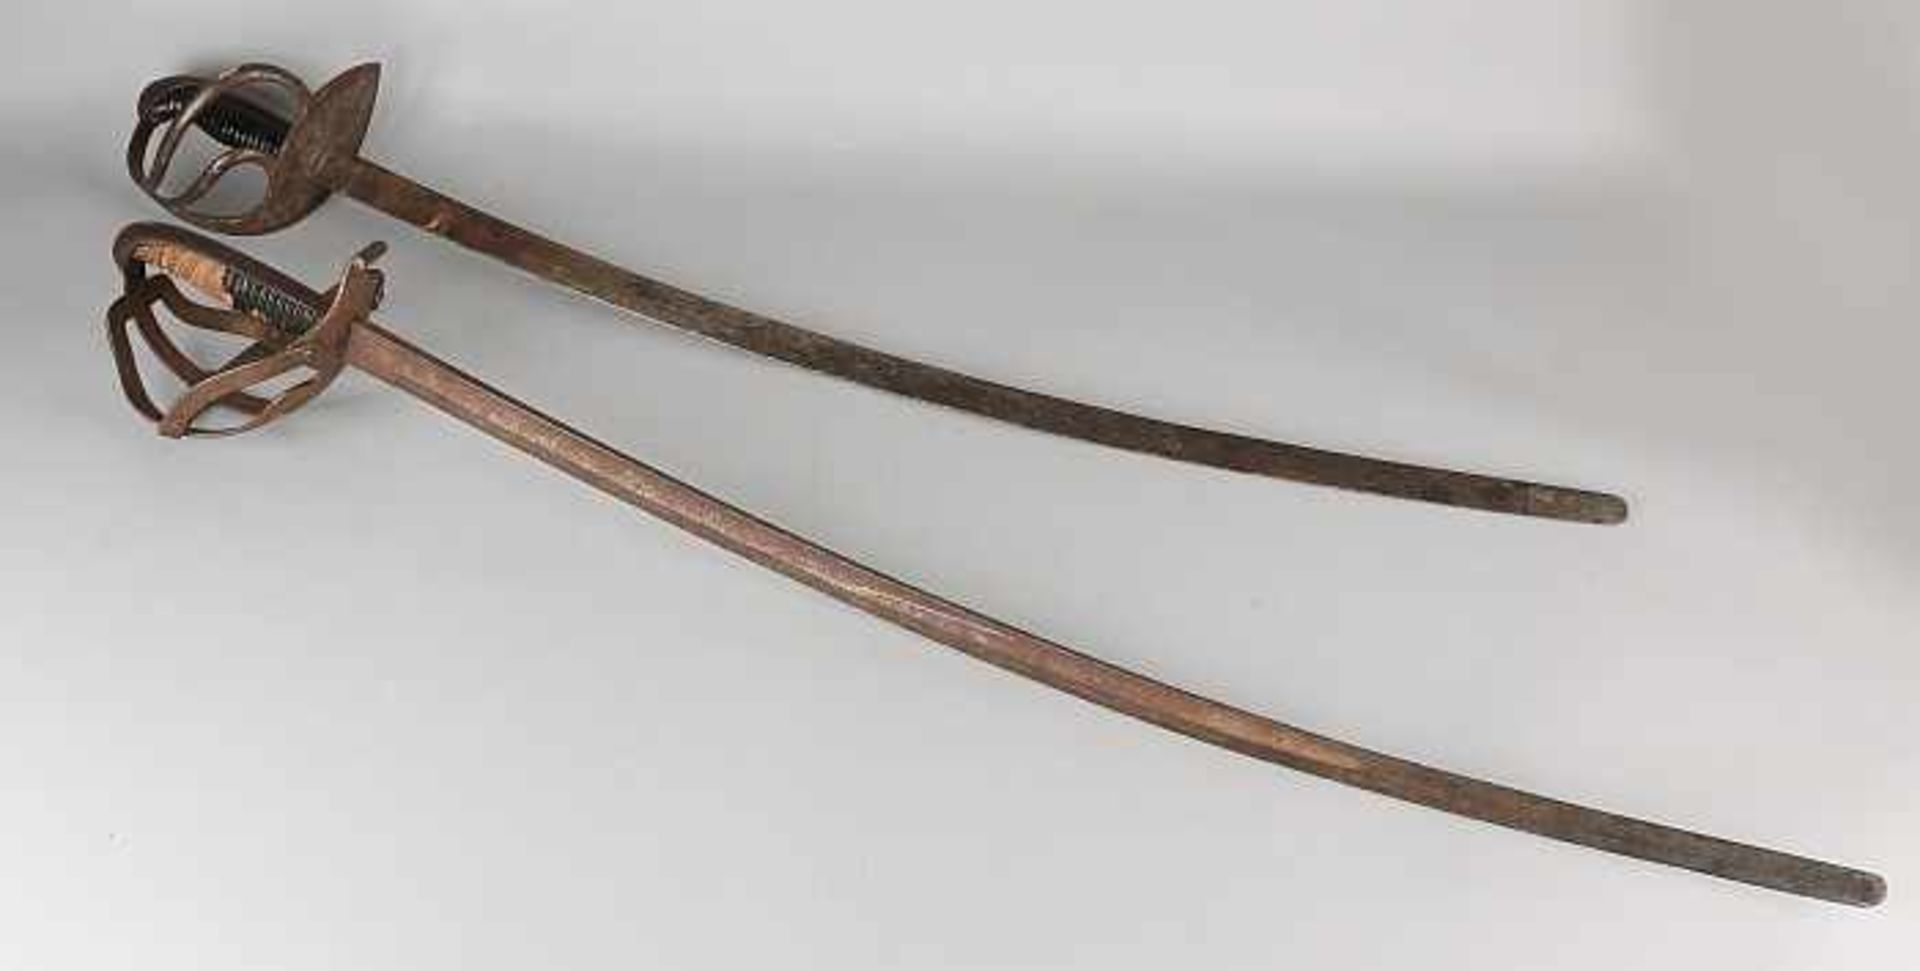 Two 19th century military training sabers. Oxidation. Dimensions: L 105 cm. In good condition.